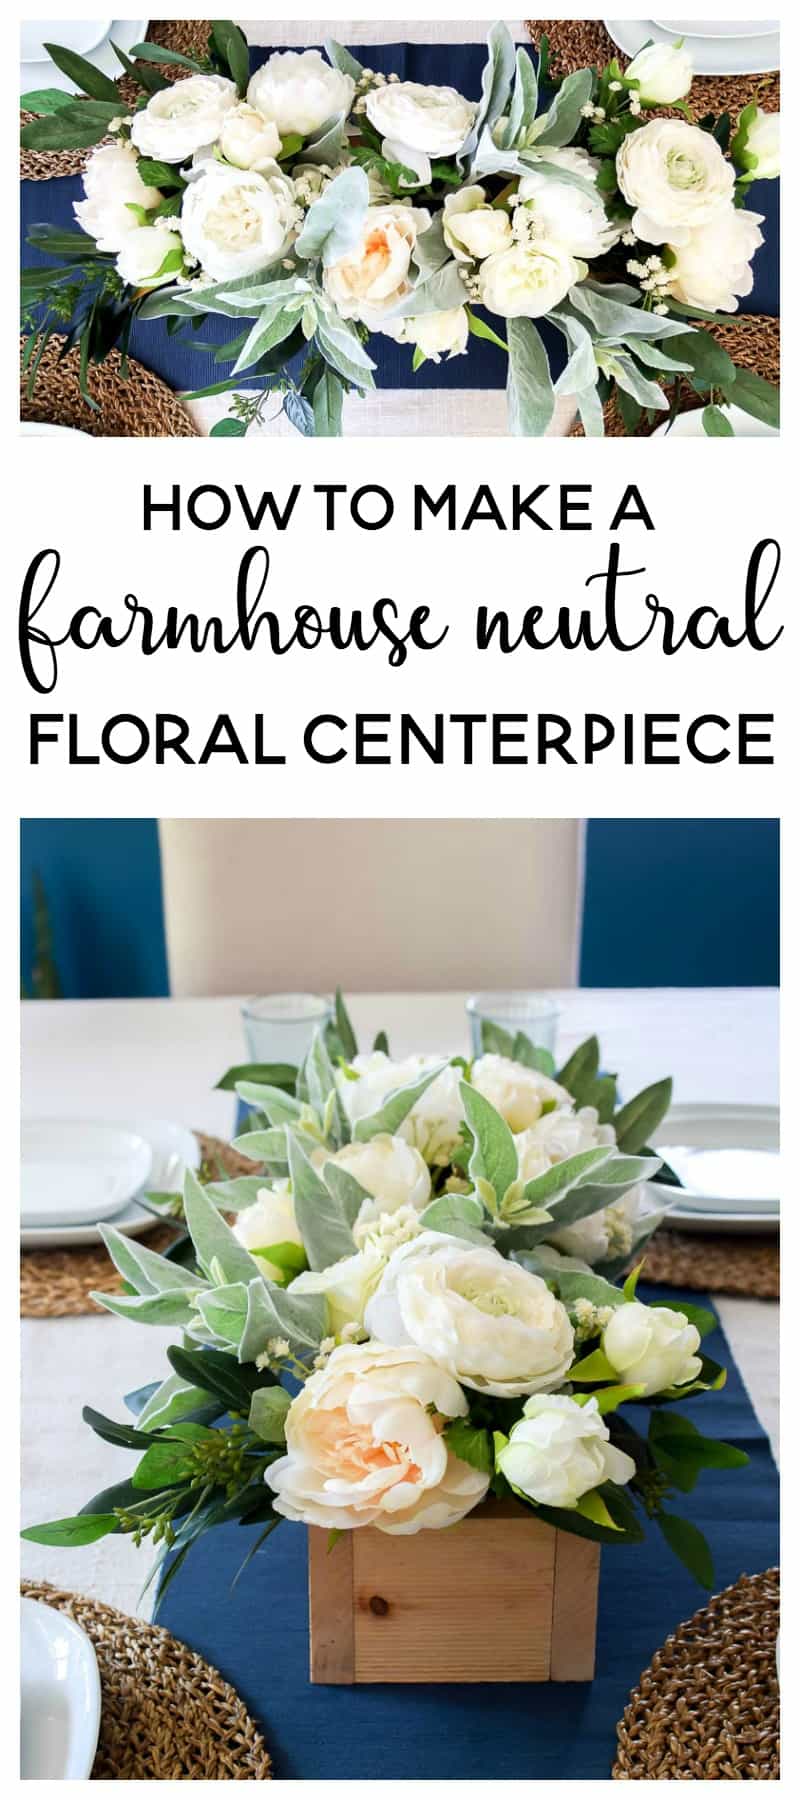 Custom farmhouse floral arrangement done in a DIY wooden box centerpiece with faux flowers and greenery